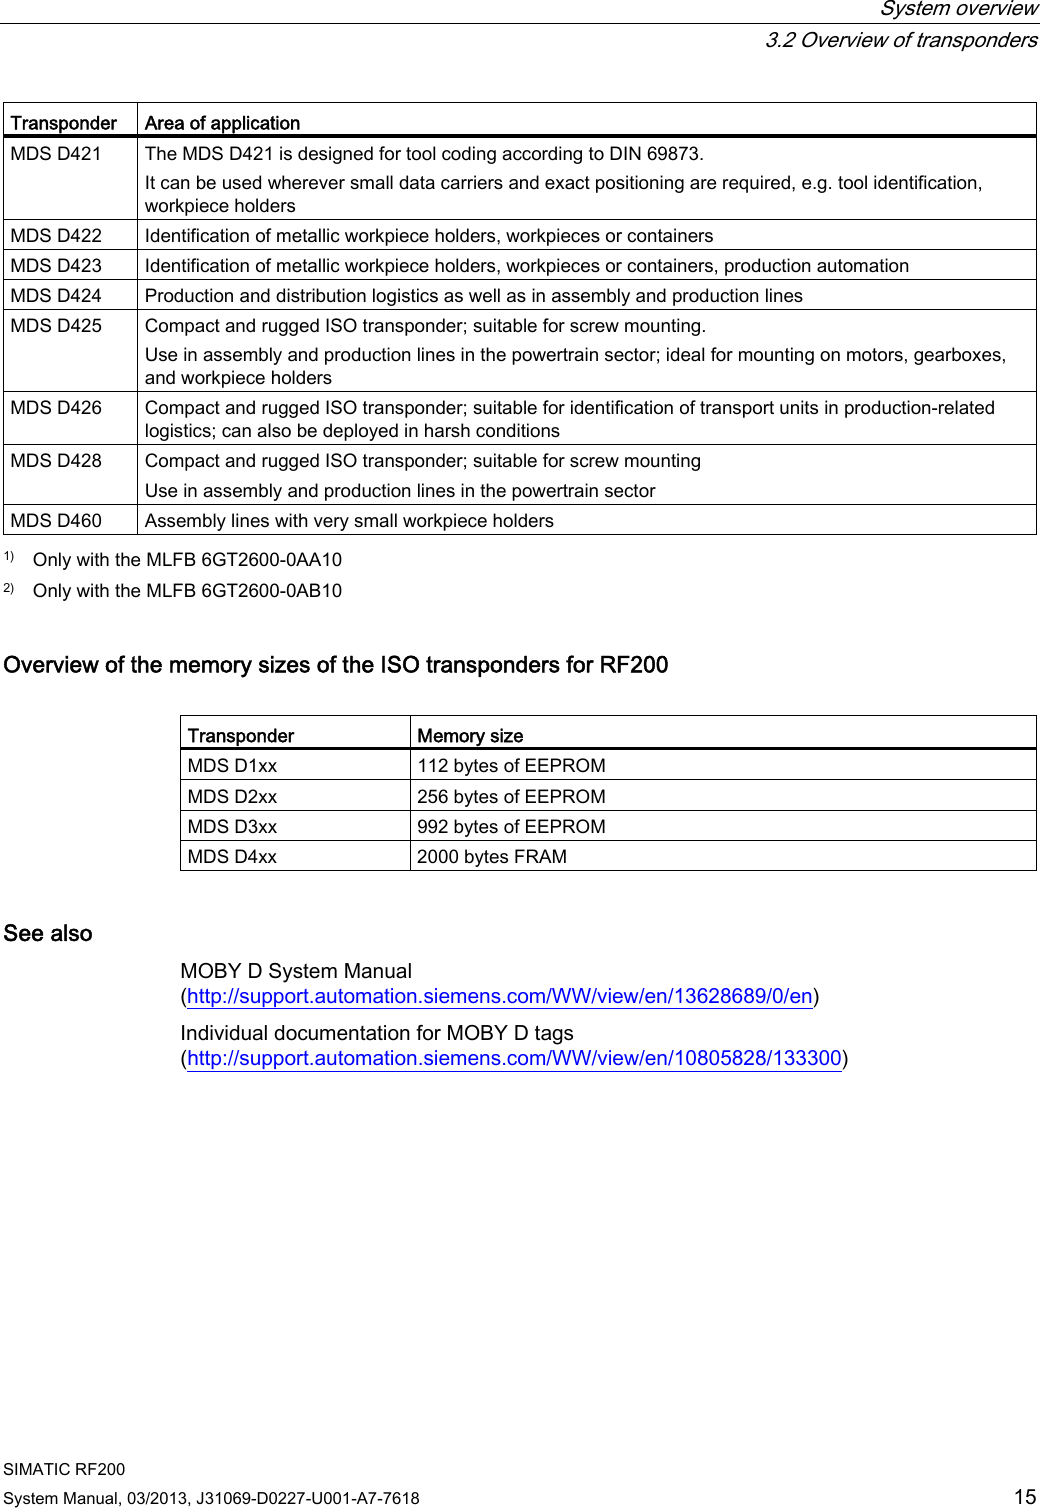  System overview  3.2 Overview of transponders SIMATIC RF200 System Manual, 03/2013, J31069-D0227-U001-A7-7618  15 Transponder  Area of application MDS D421  The MDS D421 is designed for tool coding according to DIN 69873. It can be used wherever small data carriers and exact positioning are required, e.g. tool identification, workpiece holders MDS D422  Identification of metallic workpiece holders, workpieces or containers MDS D423  Identification of metallic workpiece holders, workpieces or containers, production automation MDS D424  Production and distribution logistics as well as in assembly and production lines MDS D425  Compact and rugged ISO transponder; suitable for screw mounting. Use in assembly and production lines in the powertrain sector; ideal for mounting on motors, gearboxes, and workpiece holders MDS D426  Compact and rugged ISO transponder; suitable for identification of transport units in production-related logistics; can also be deployed in harsh conditions MDS D428  Compact and rugged ISO transponder; suitable for screw mounting Use in assembly and production lines in the powertrain sector MDS D460  Assembly lines with very small workpiece holders  1)  Only with the MLFB 6GT2600-0AA10 2)  Only with the MLFB 6GT2600-0AB10 Overview of the memory sizes of the ISO transponders for RF200  Transponder  Memory size MDS D1xx  112 bytes of EEPROM MDS D2xx  256 bytes of EEPROM MDS D3xx  992 bytes of EEPROM MDS D4xx  2000 bytes FRAM See also MOBY D System Manual (http://support.automation.siemens.com/WW/view/en/13628689/0/en) Individual documentation for MOBY D tags (http://support.automation.siemens.com/WW/view/en/10805828/133300) 